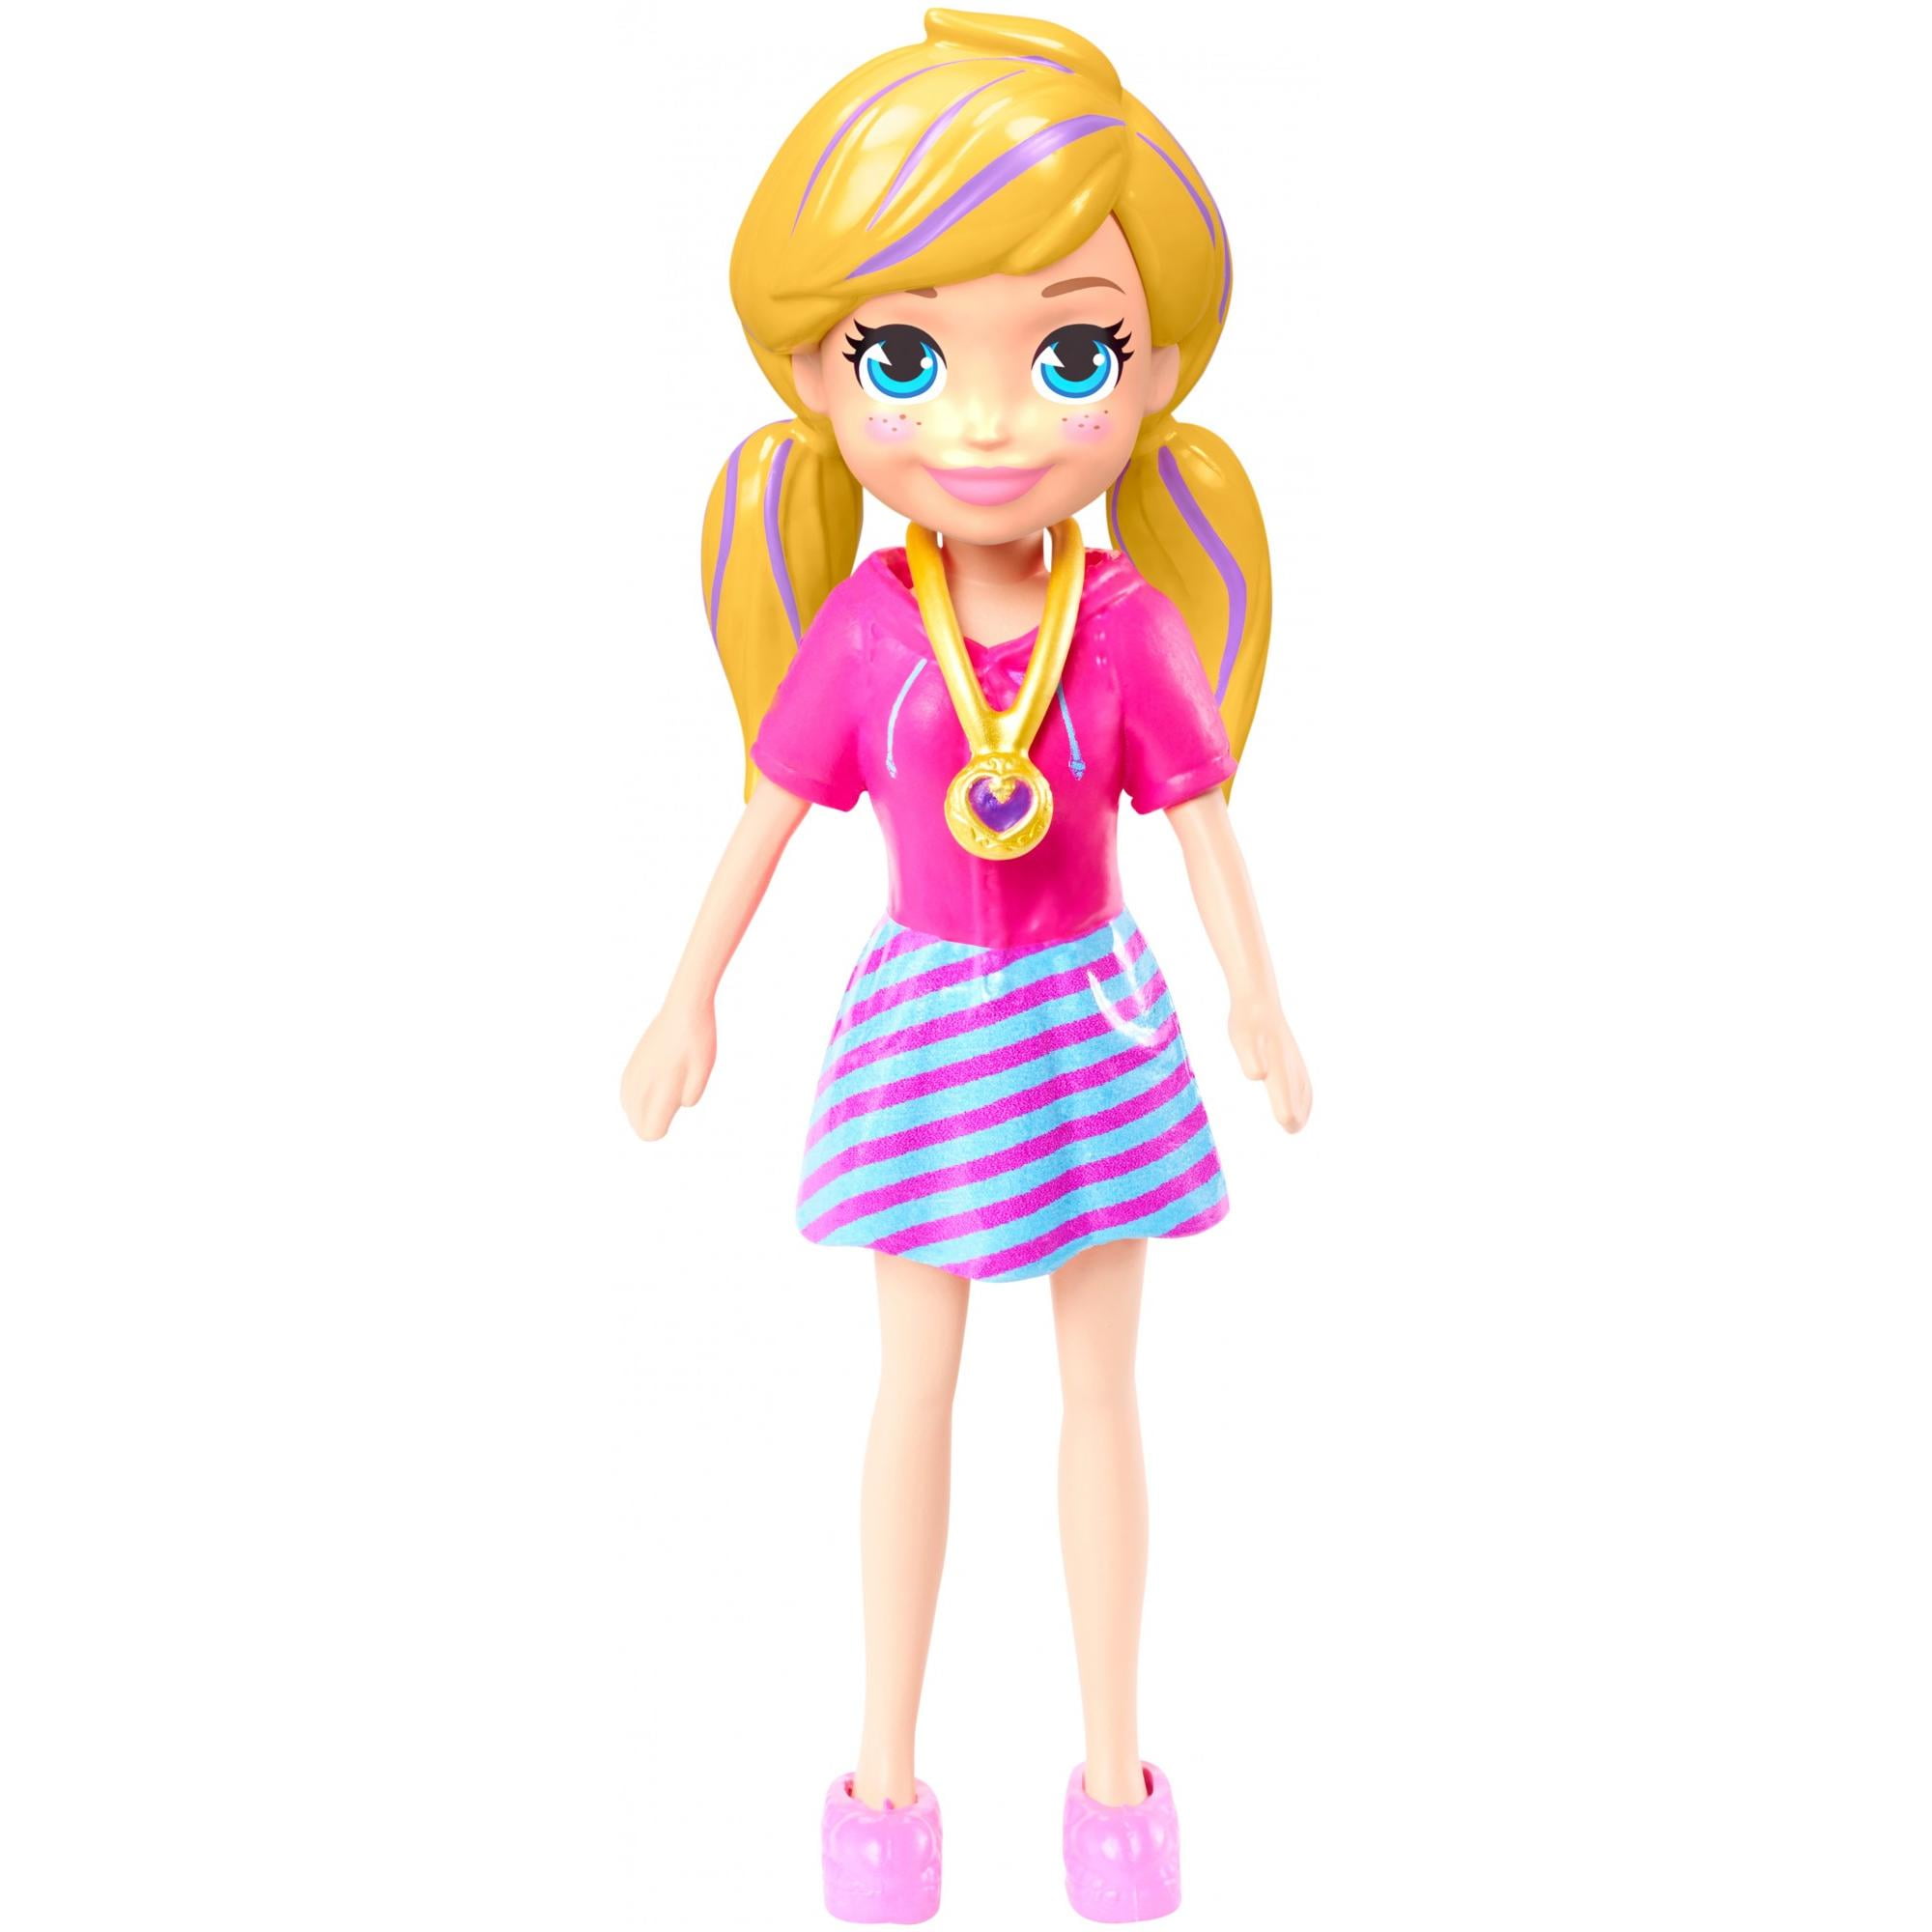 4 Polly Pocket Impulse Doll GLH67 Details about   NEW 